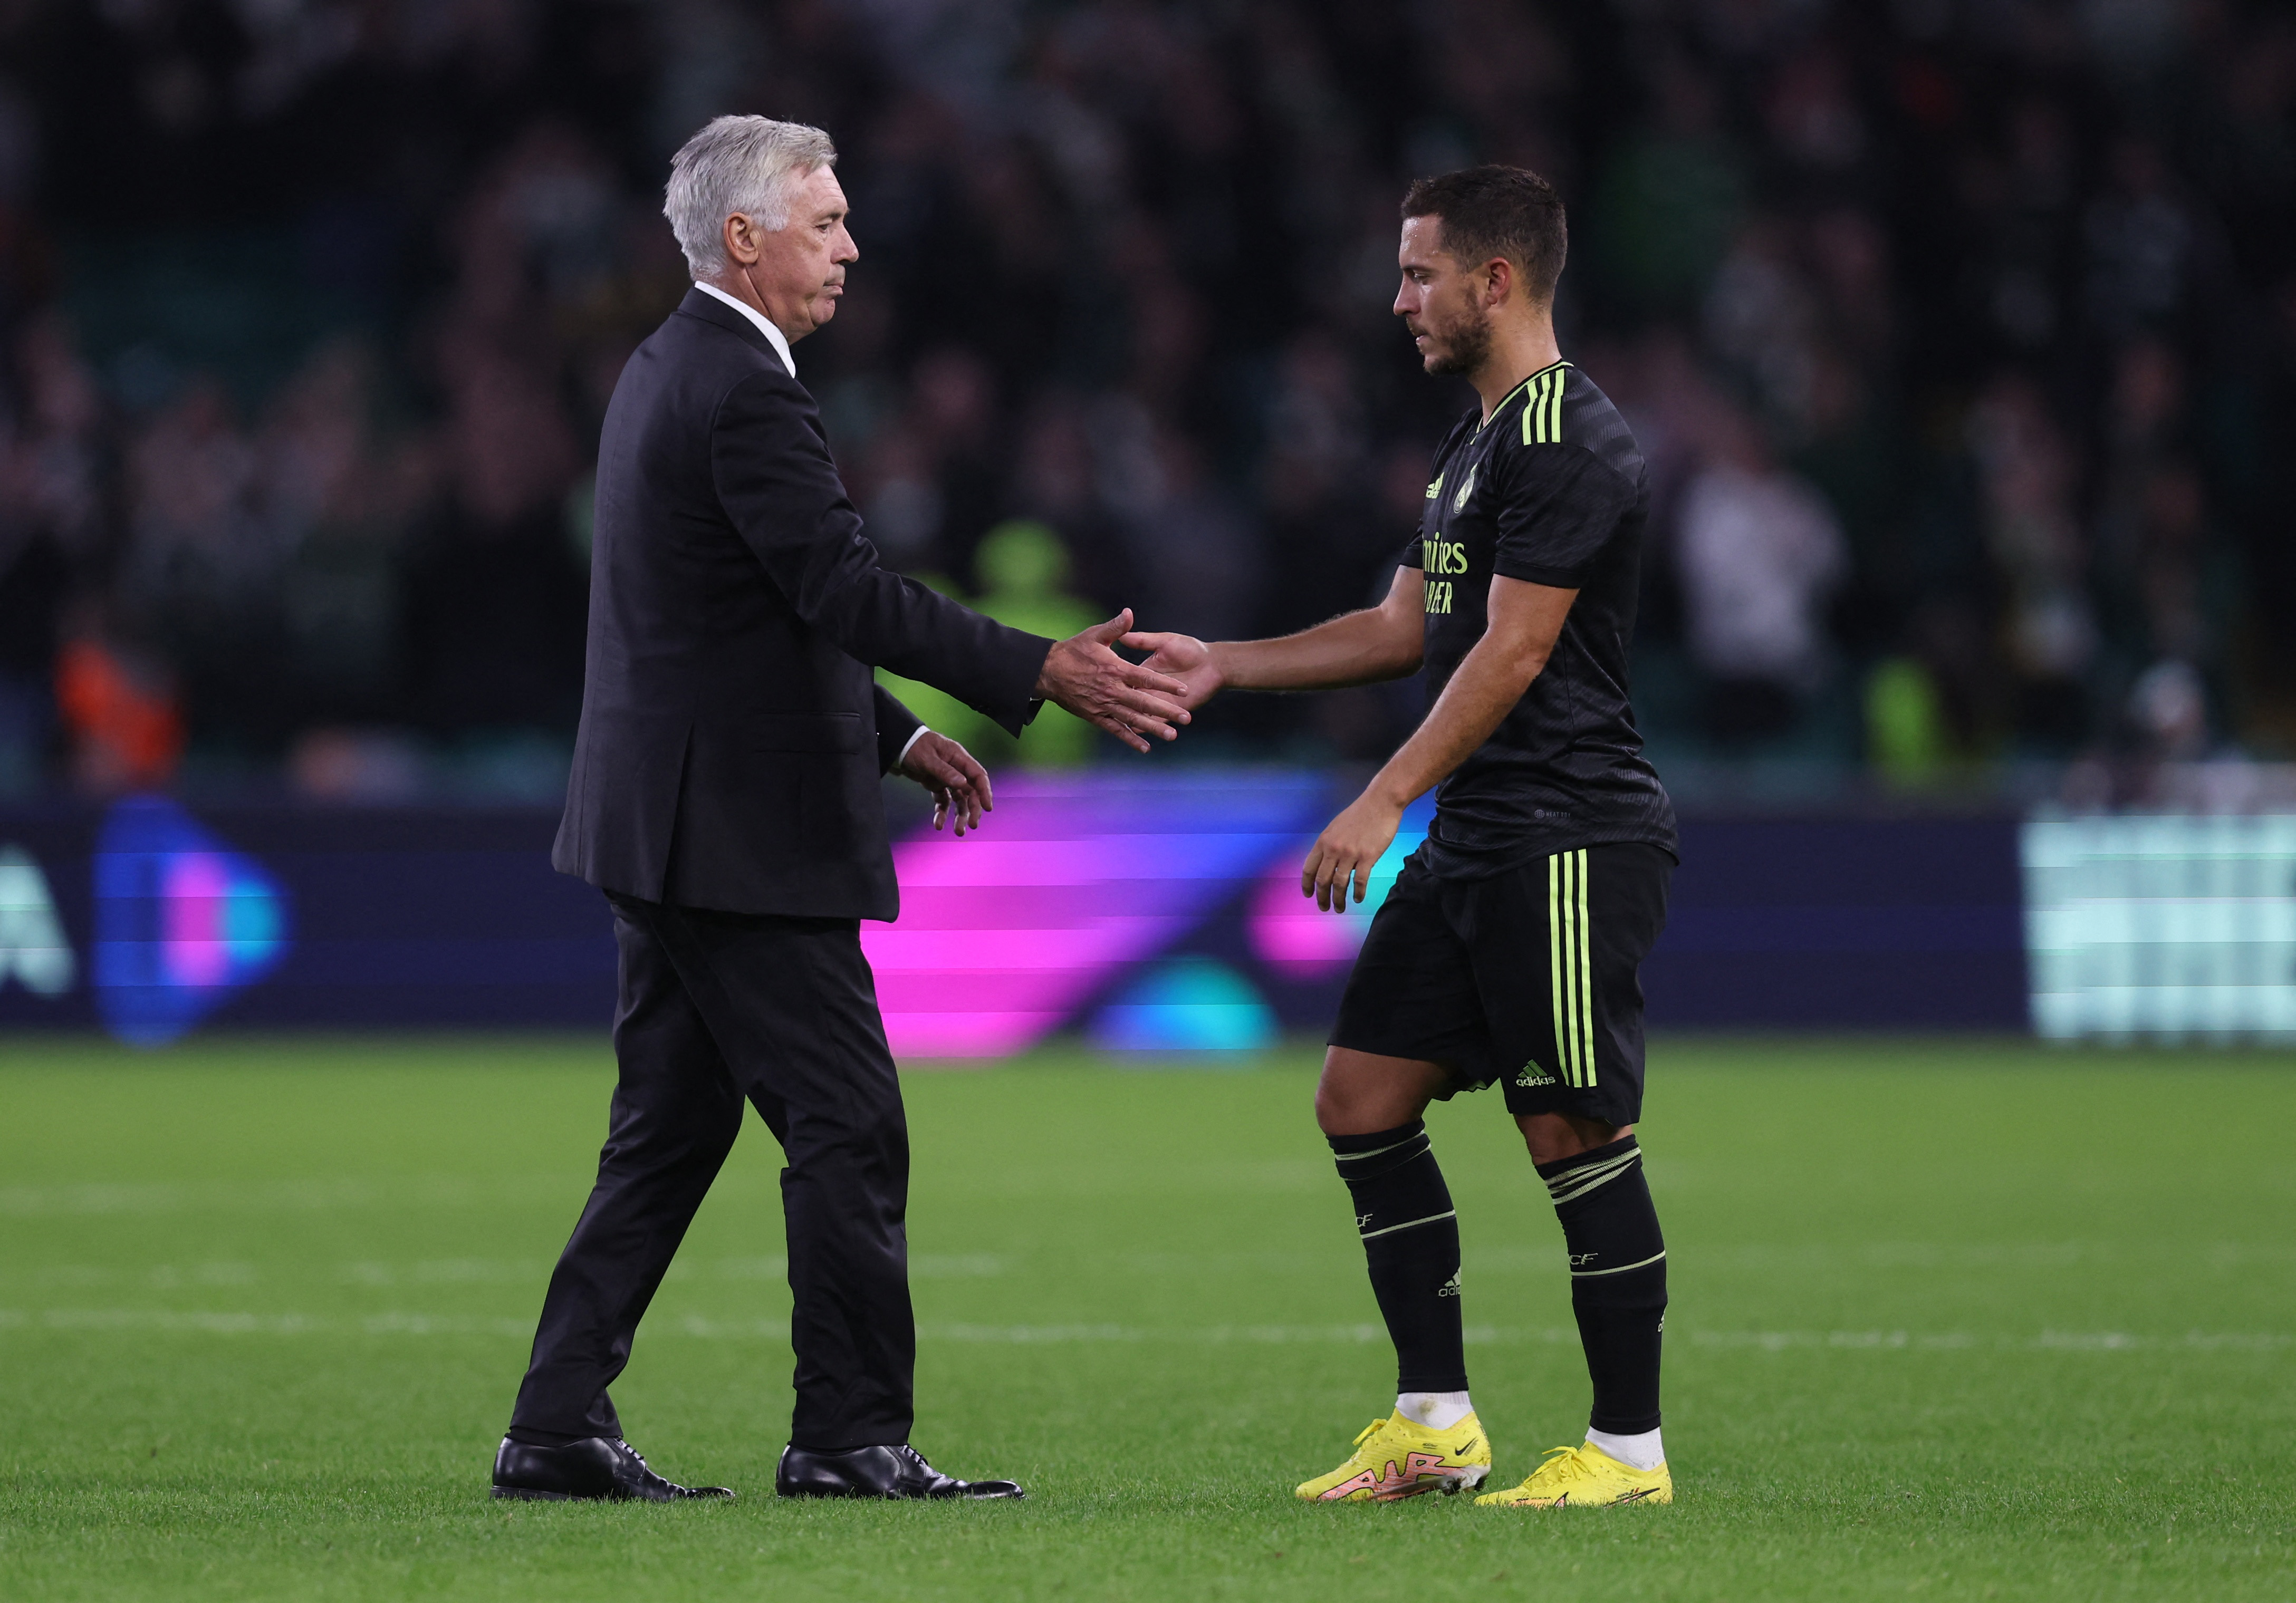 Real Madrid coach Carlo Ancelotti shakes hands with Eden Hazard after the match REUTERS/Russell Cheyne